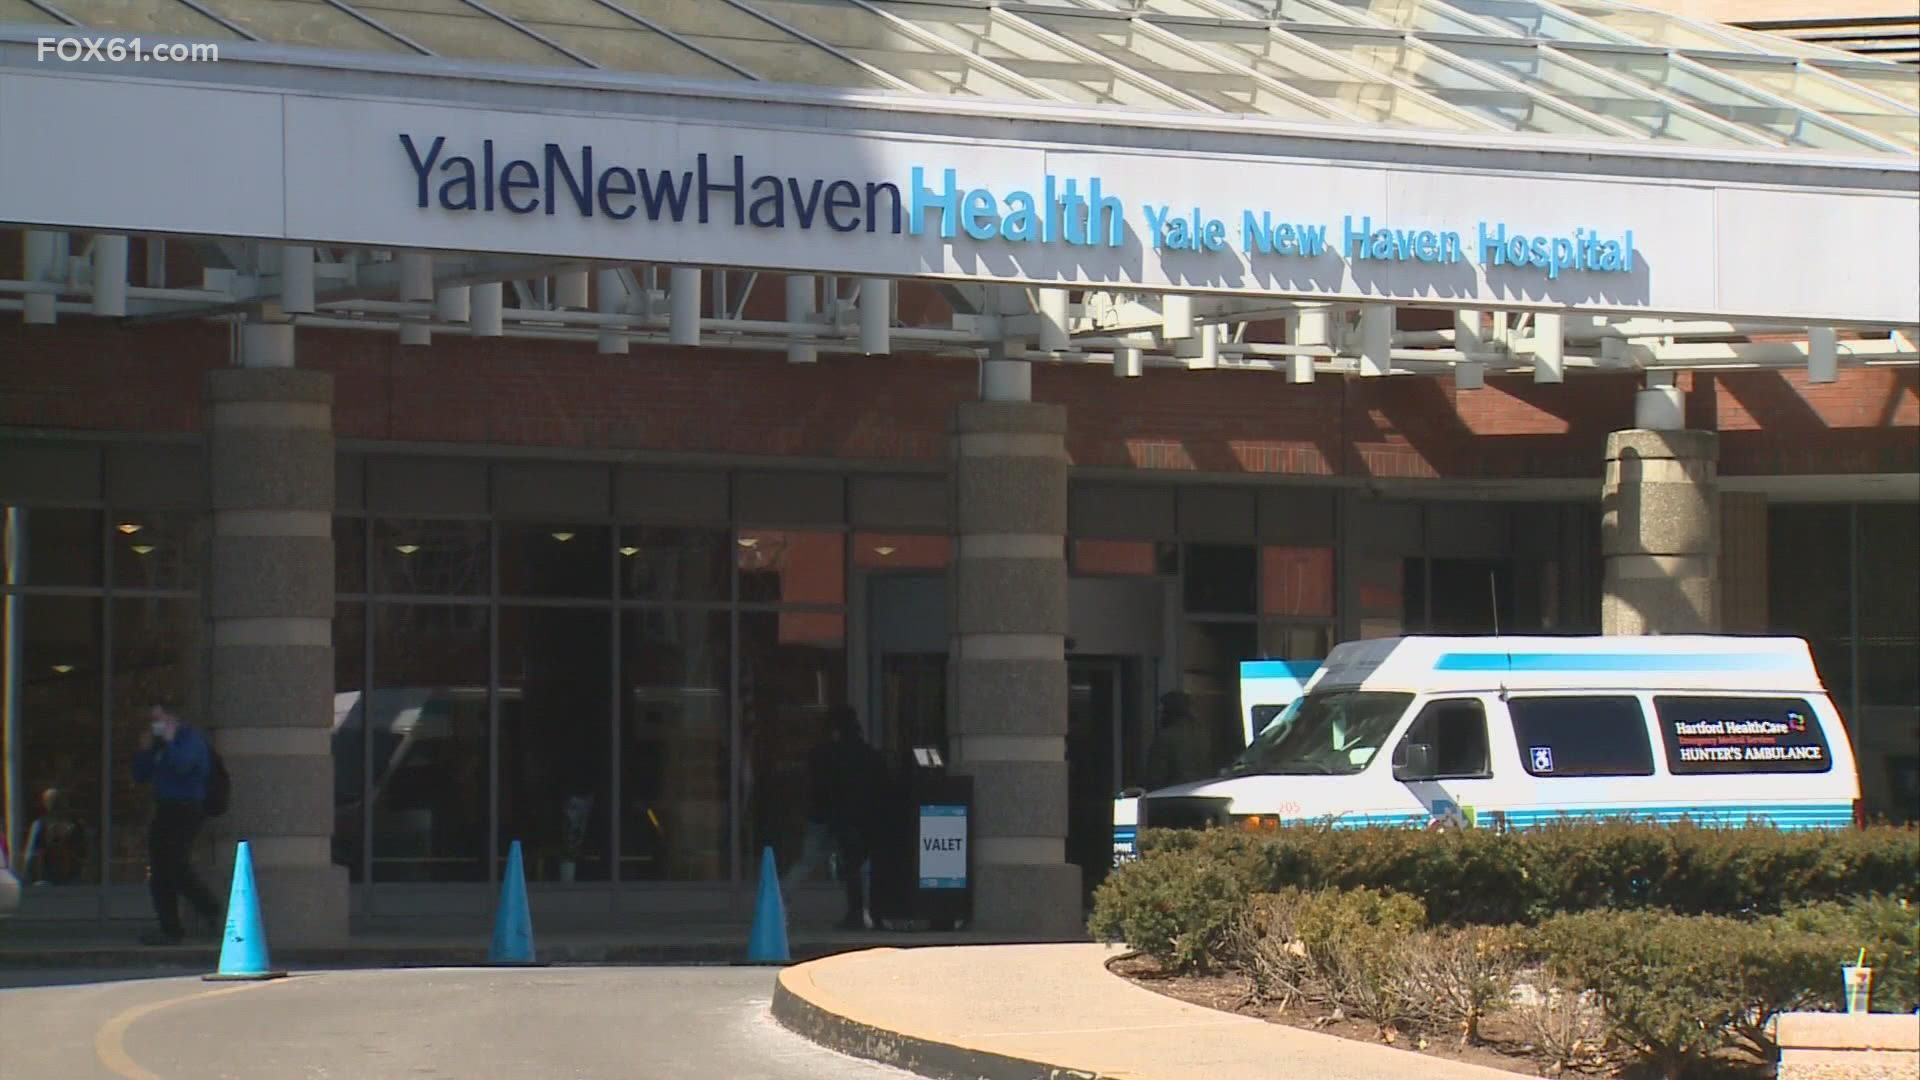 The church is connecting soldiers with Yale-New Haven Health to receive treatment